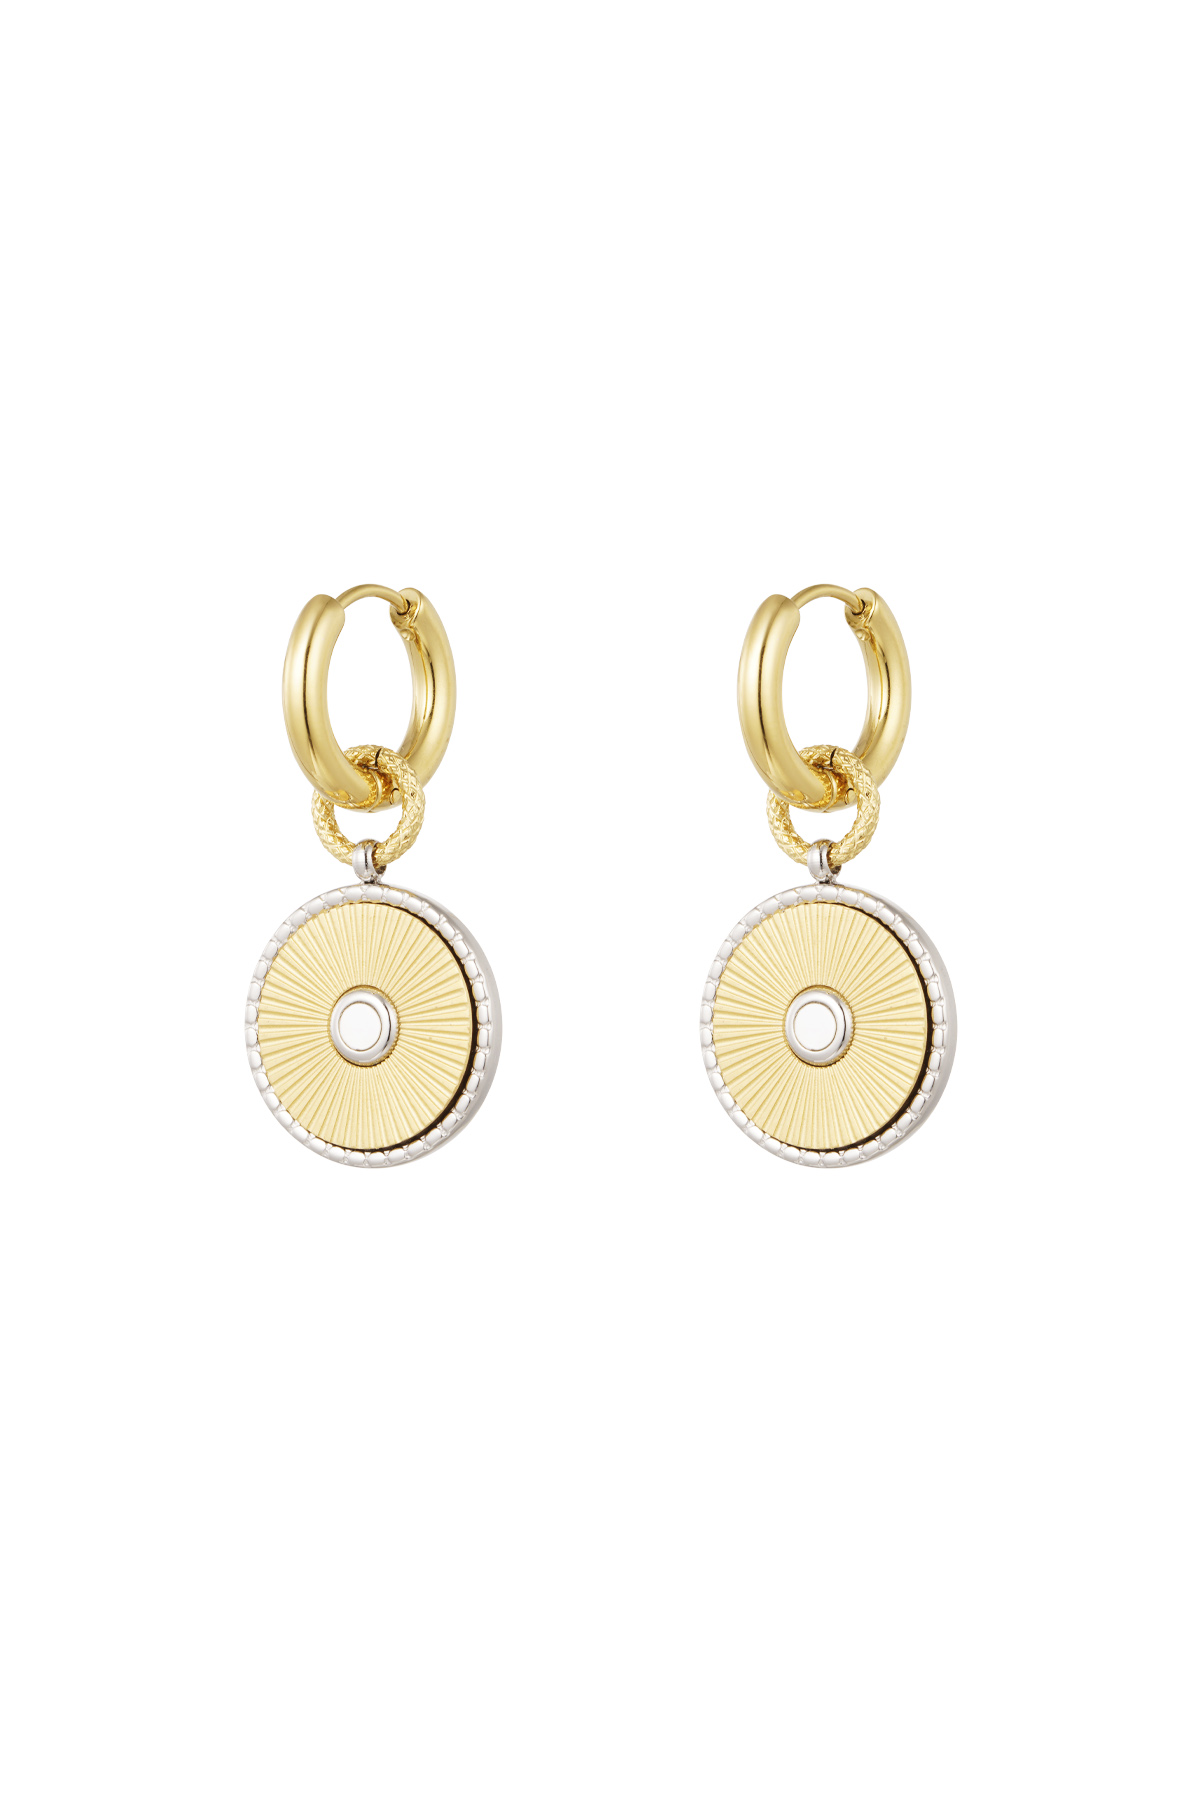 Round earrings - gold/silver h5 